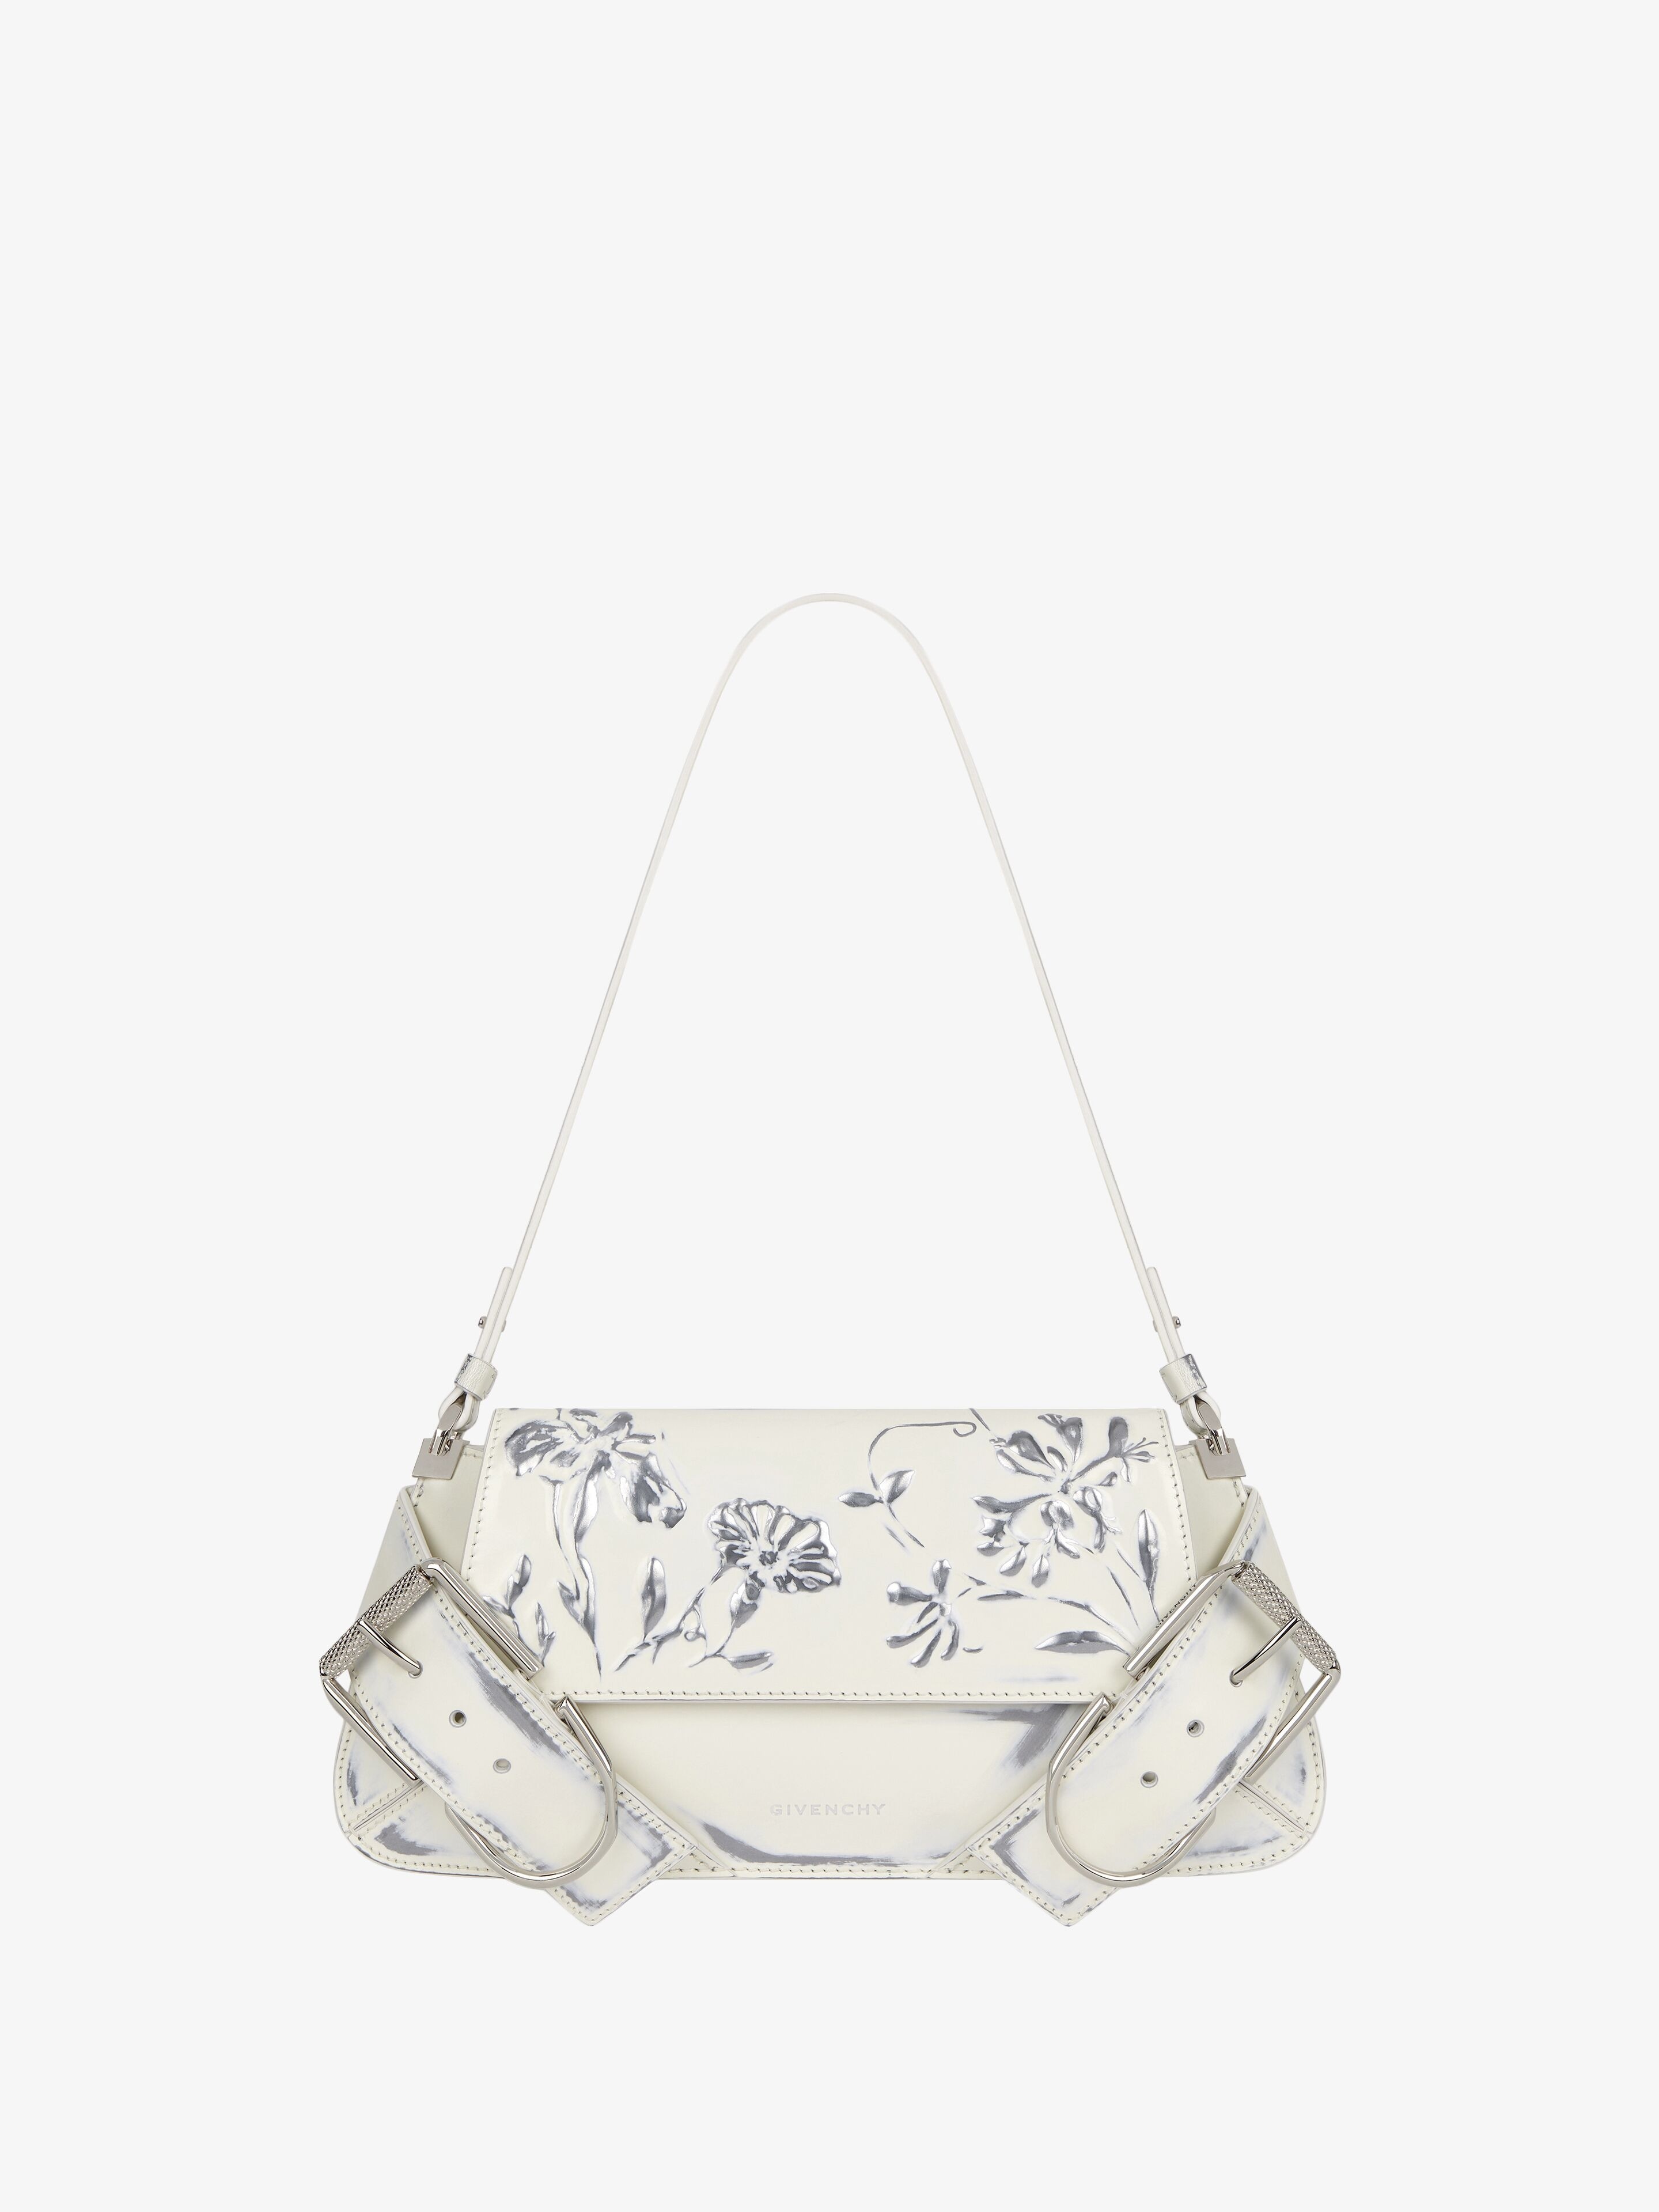 VOYOU SHOULDER FLAP BAG IN LEATHER WITH FLORAL PATTERN - 1